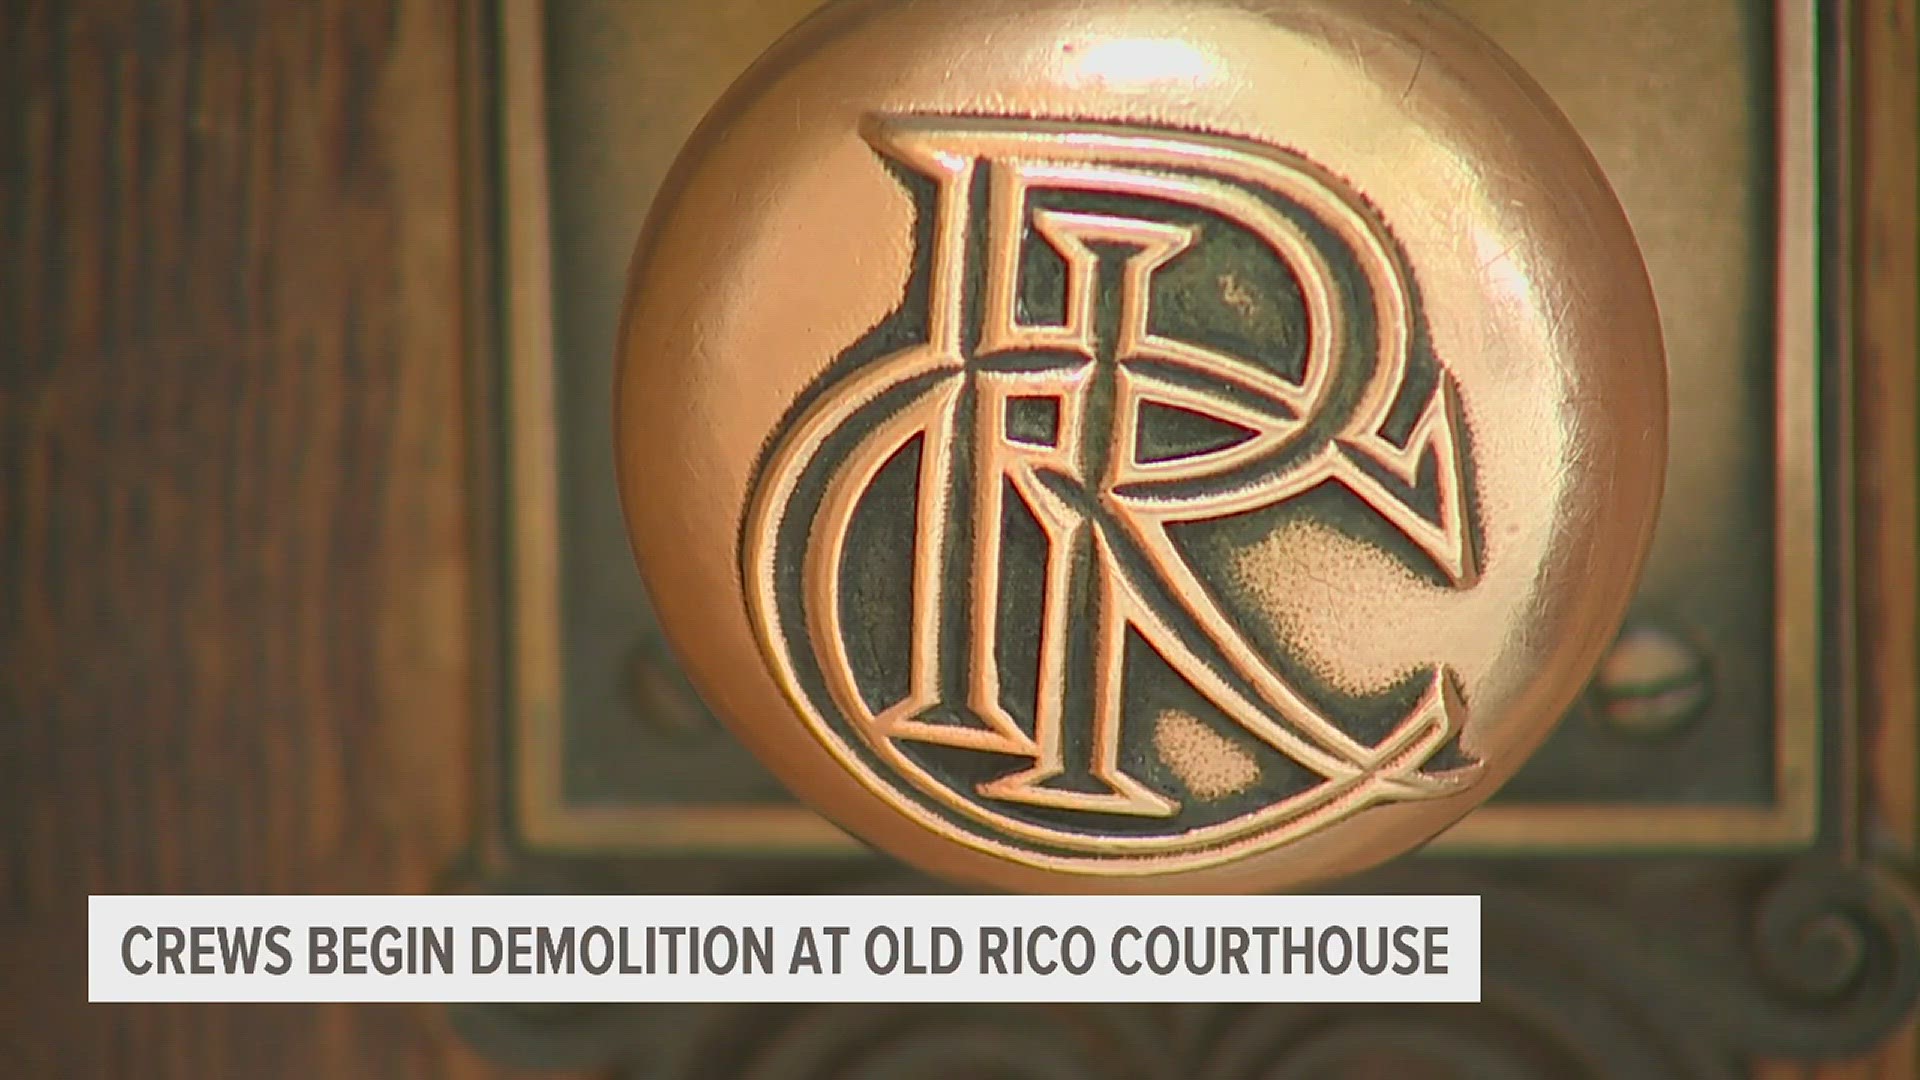 According to RICO Board Chairman Richard Brunk, artifacts like engraved door knobs and the marble founder's plaque are being saved for public display.